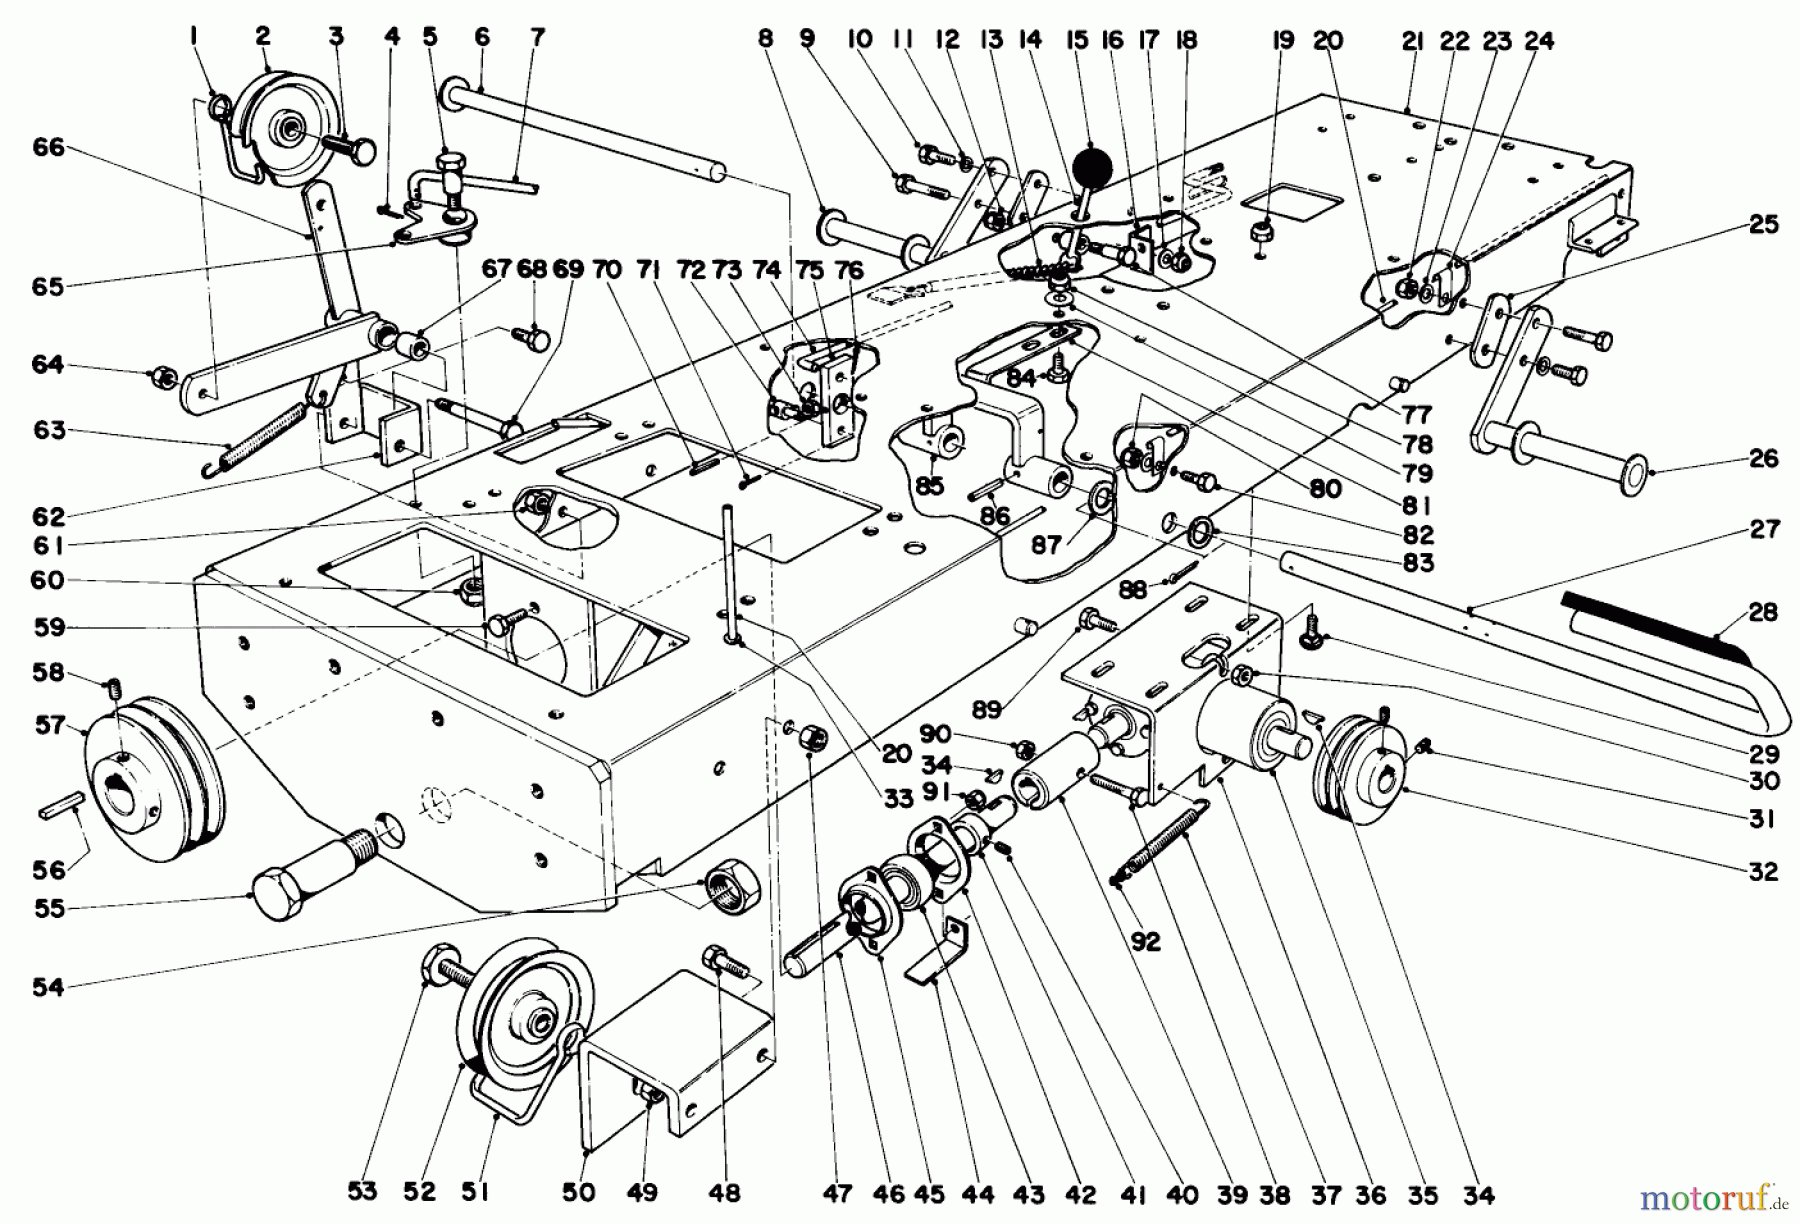  Toro Neu Mowers, Lawn & Garden Tractor Seite 1 55402 (960) - Toro 960 Suburban Lawn Tractor, 1969 (9000001-9999999) CHASSIS ASSEMBLY